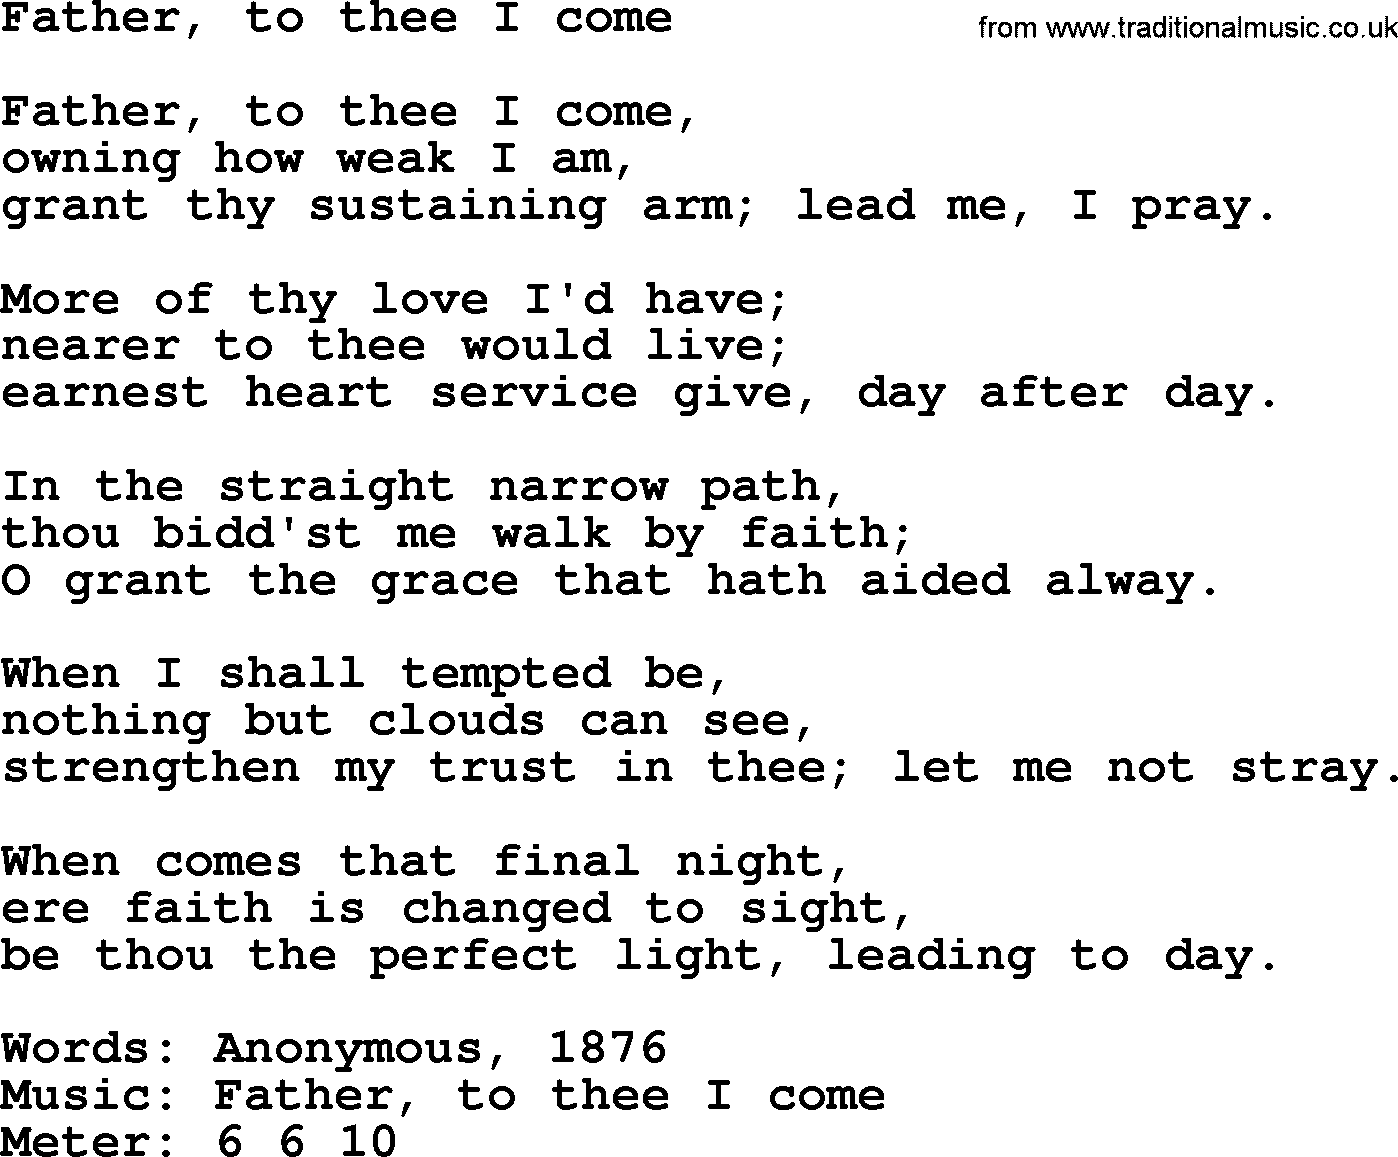 Book of Common Praise Hymn: Father, To Thee I Come.txt lyrics with midi music